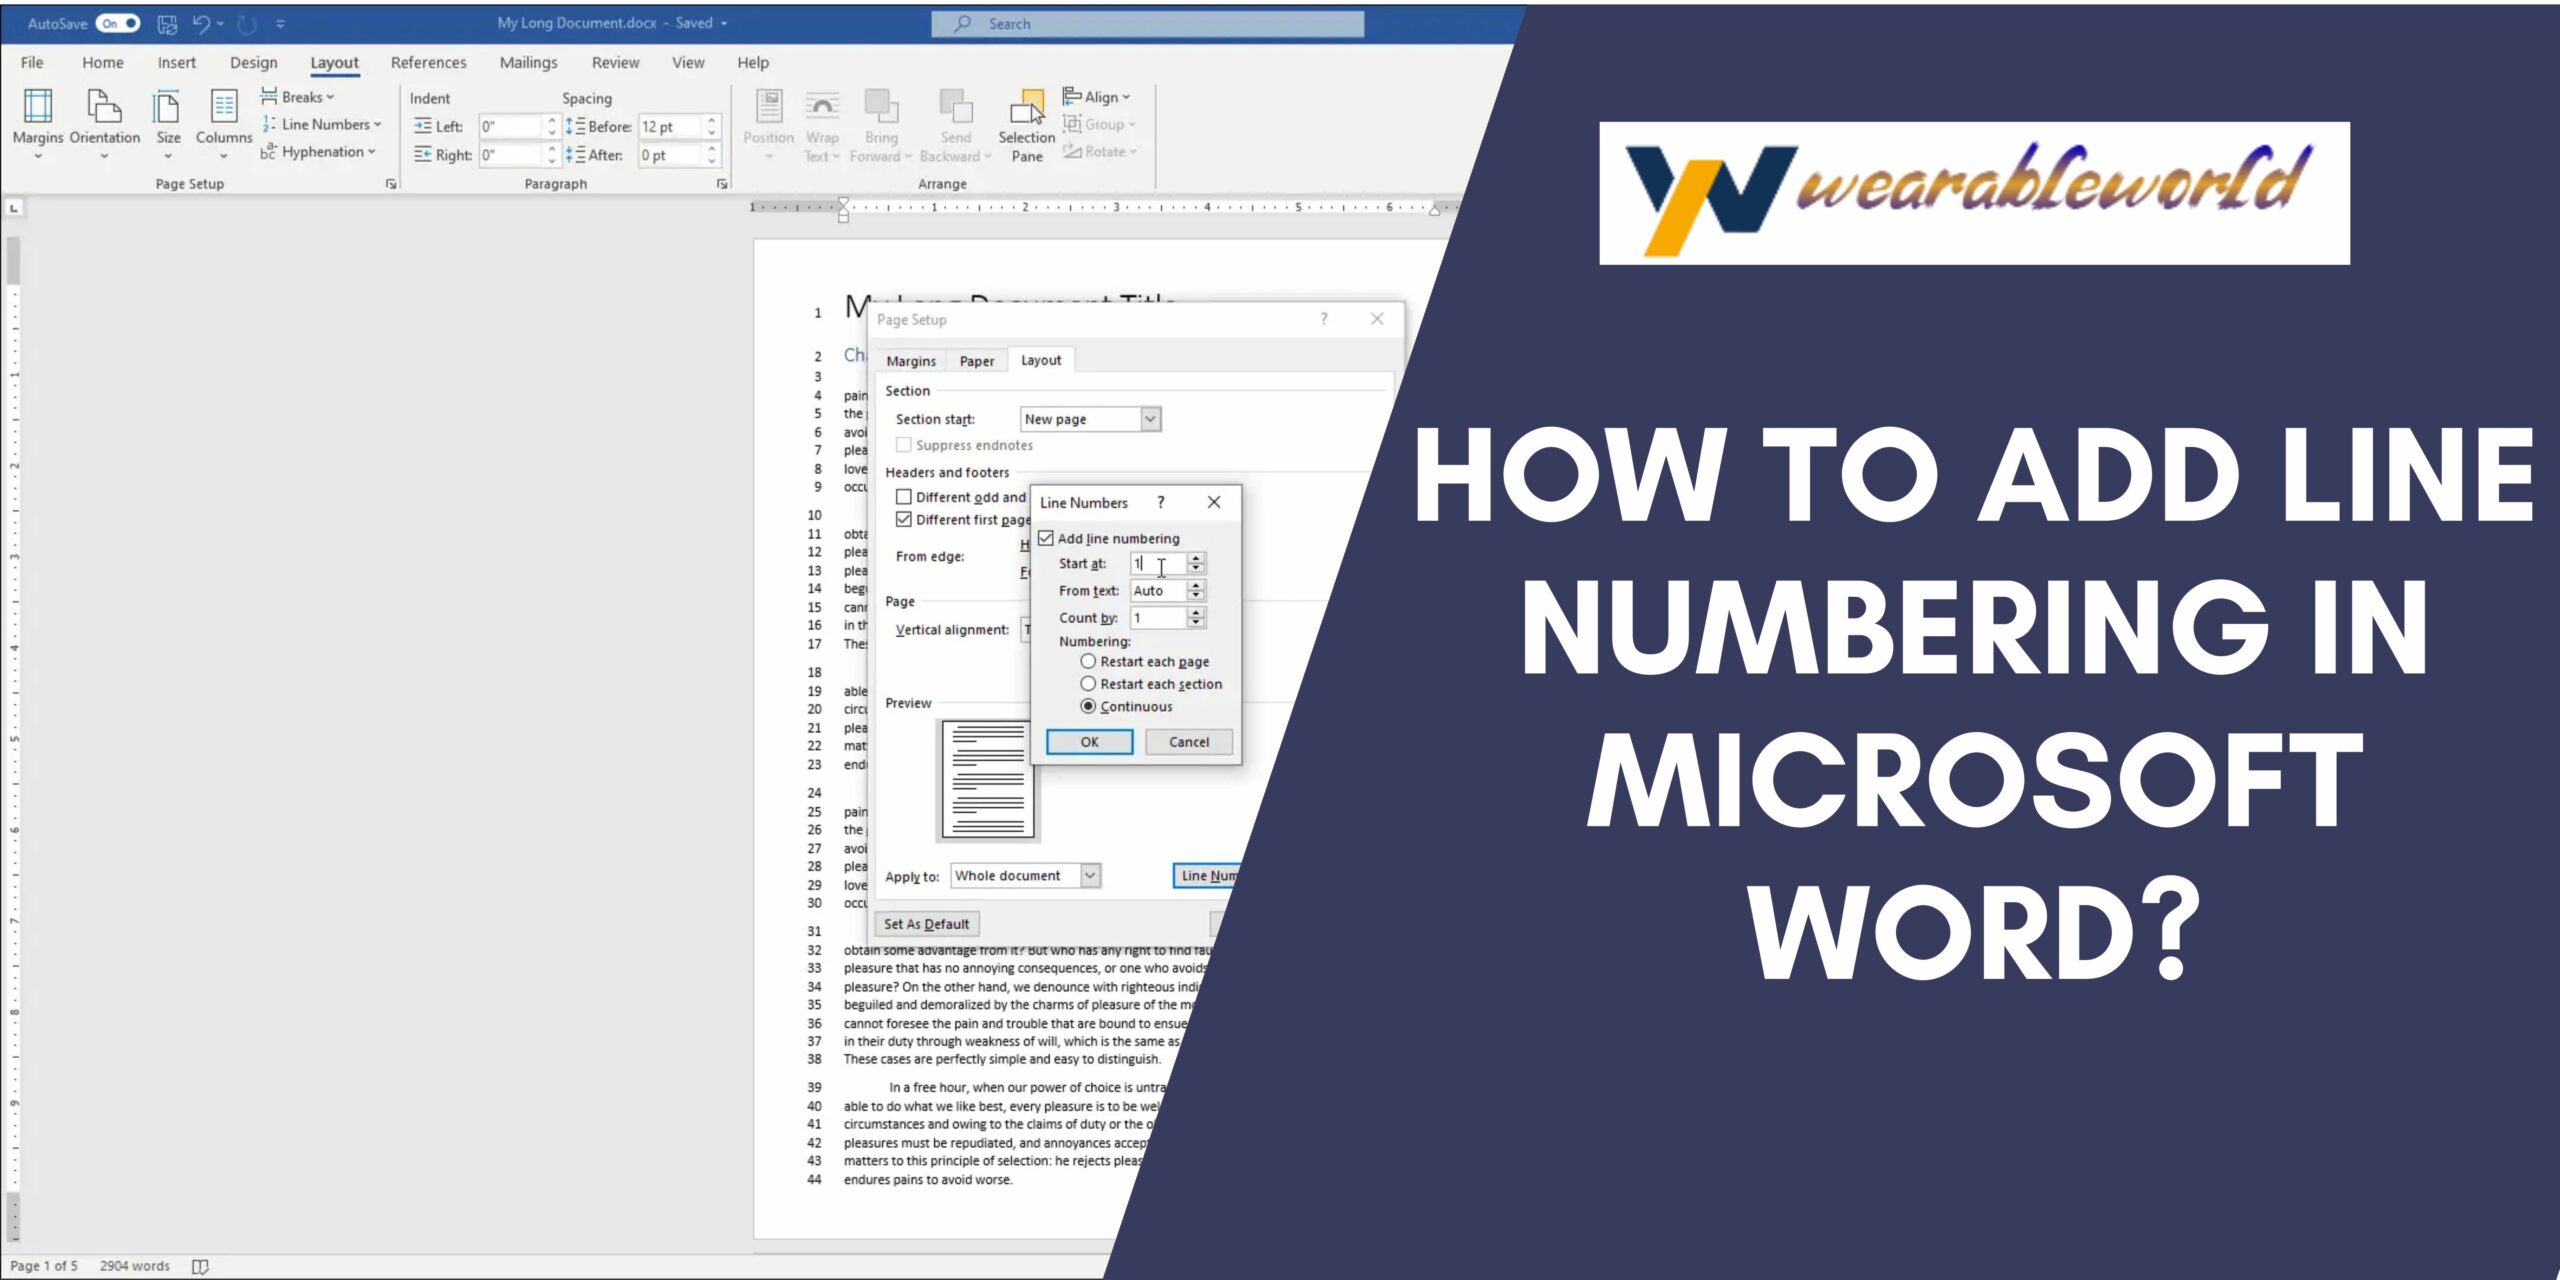 Add line numbering in Microsoft Word